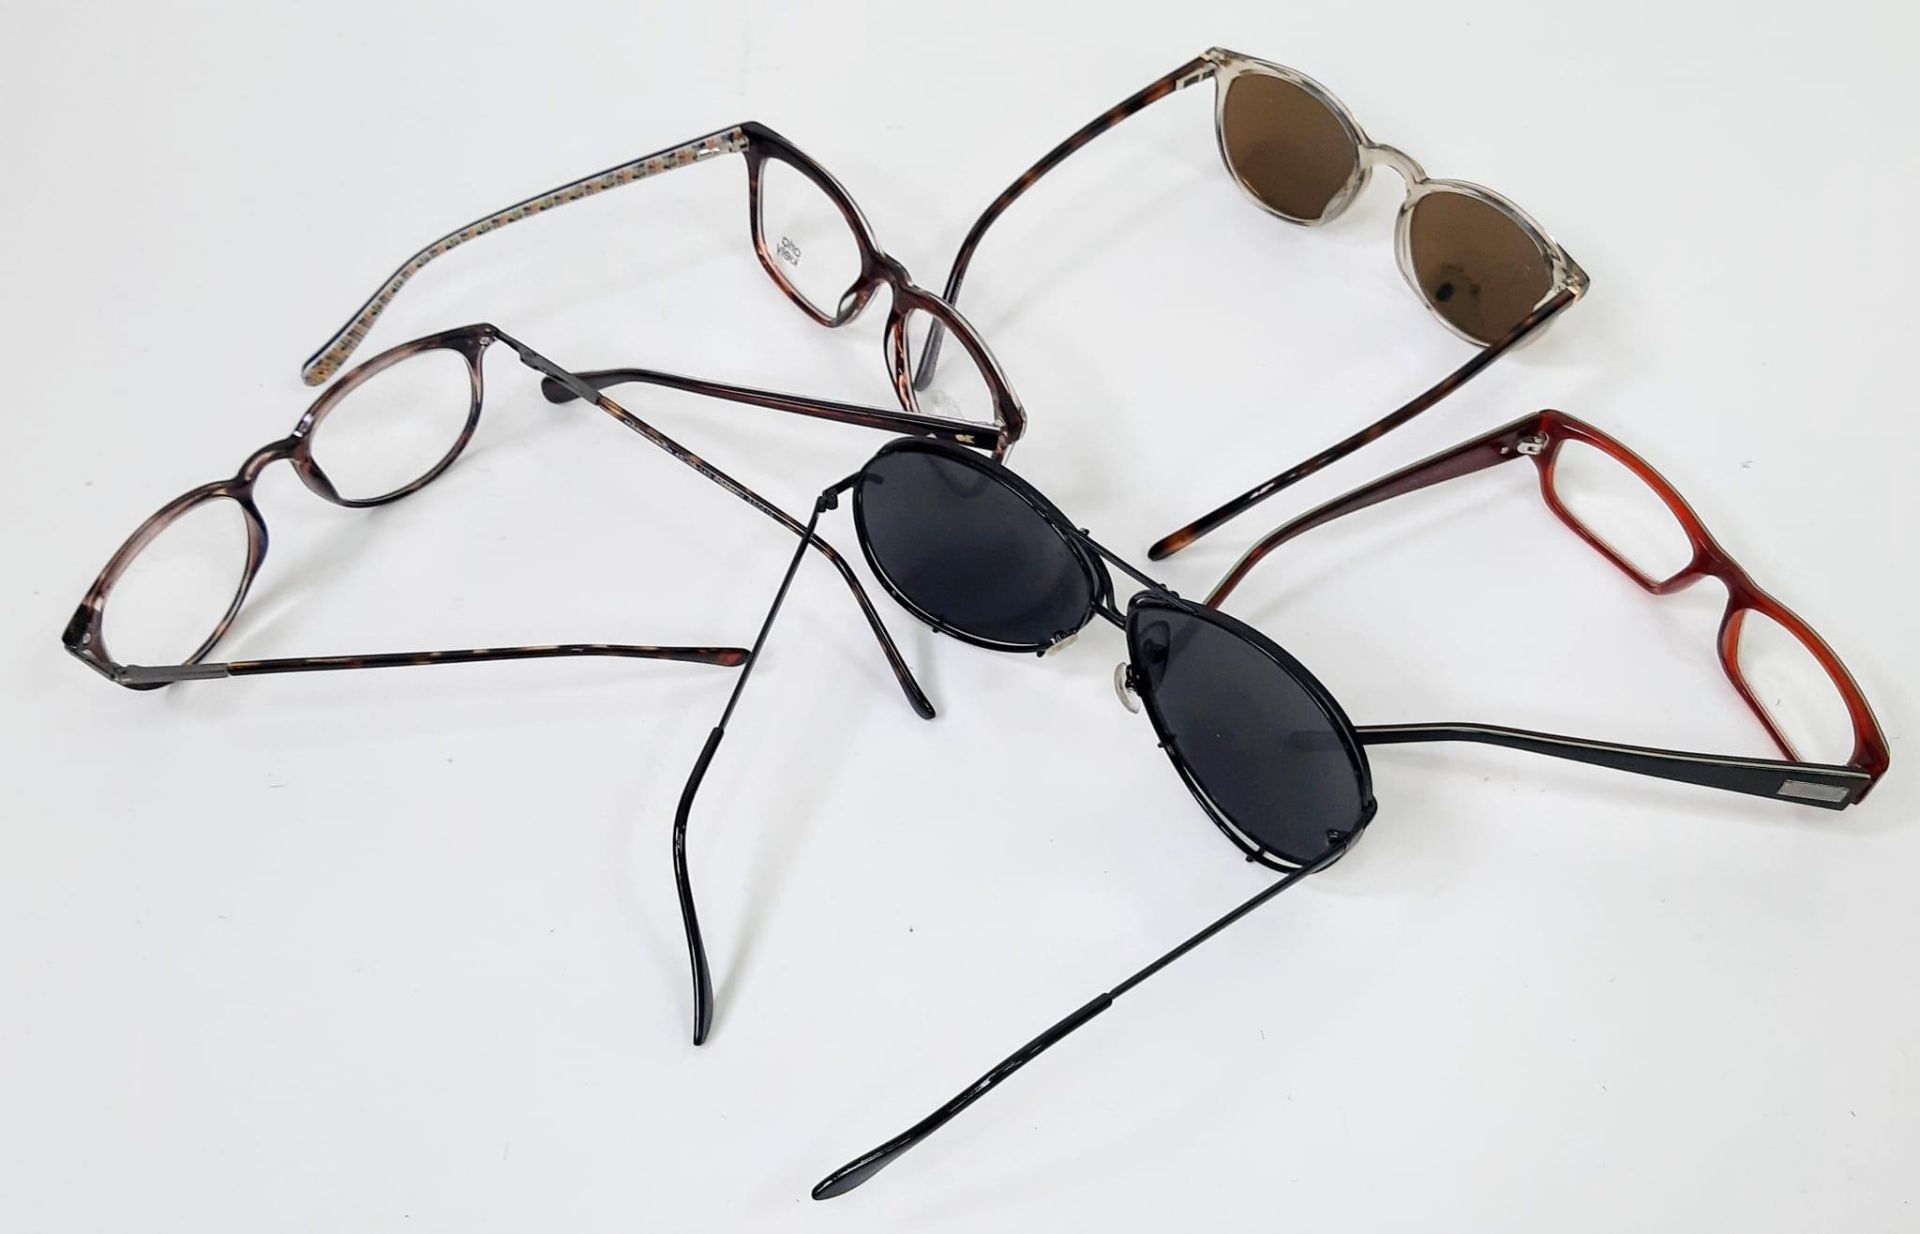 Five Pairs of Branded Glasses/Sunglasses - Image 4 of 6